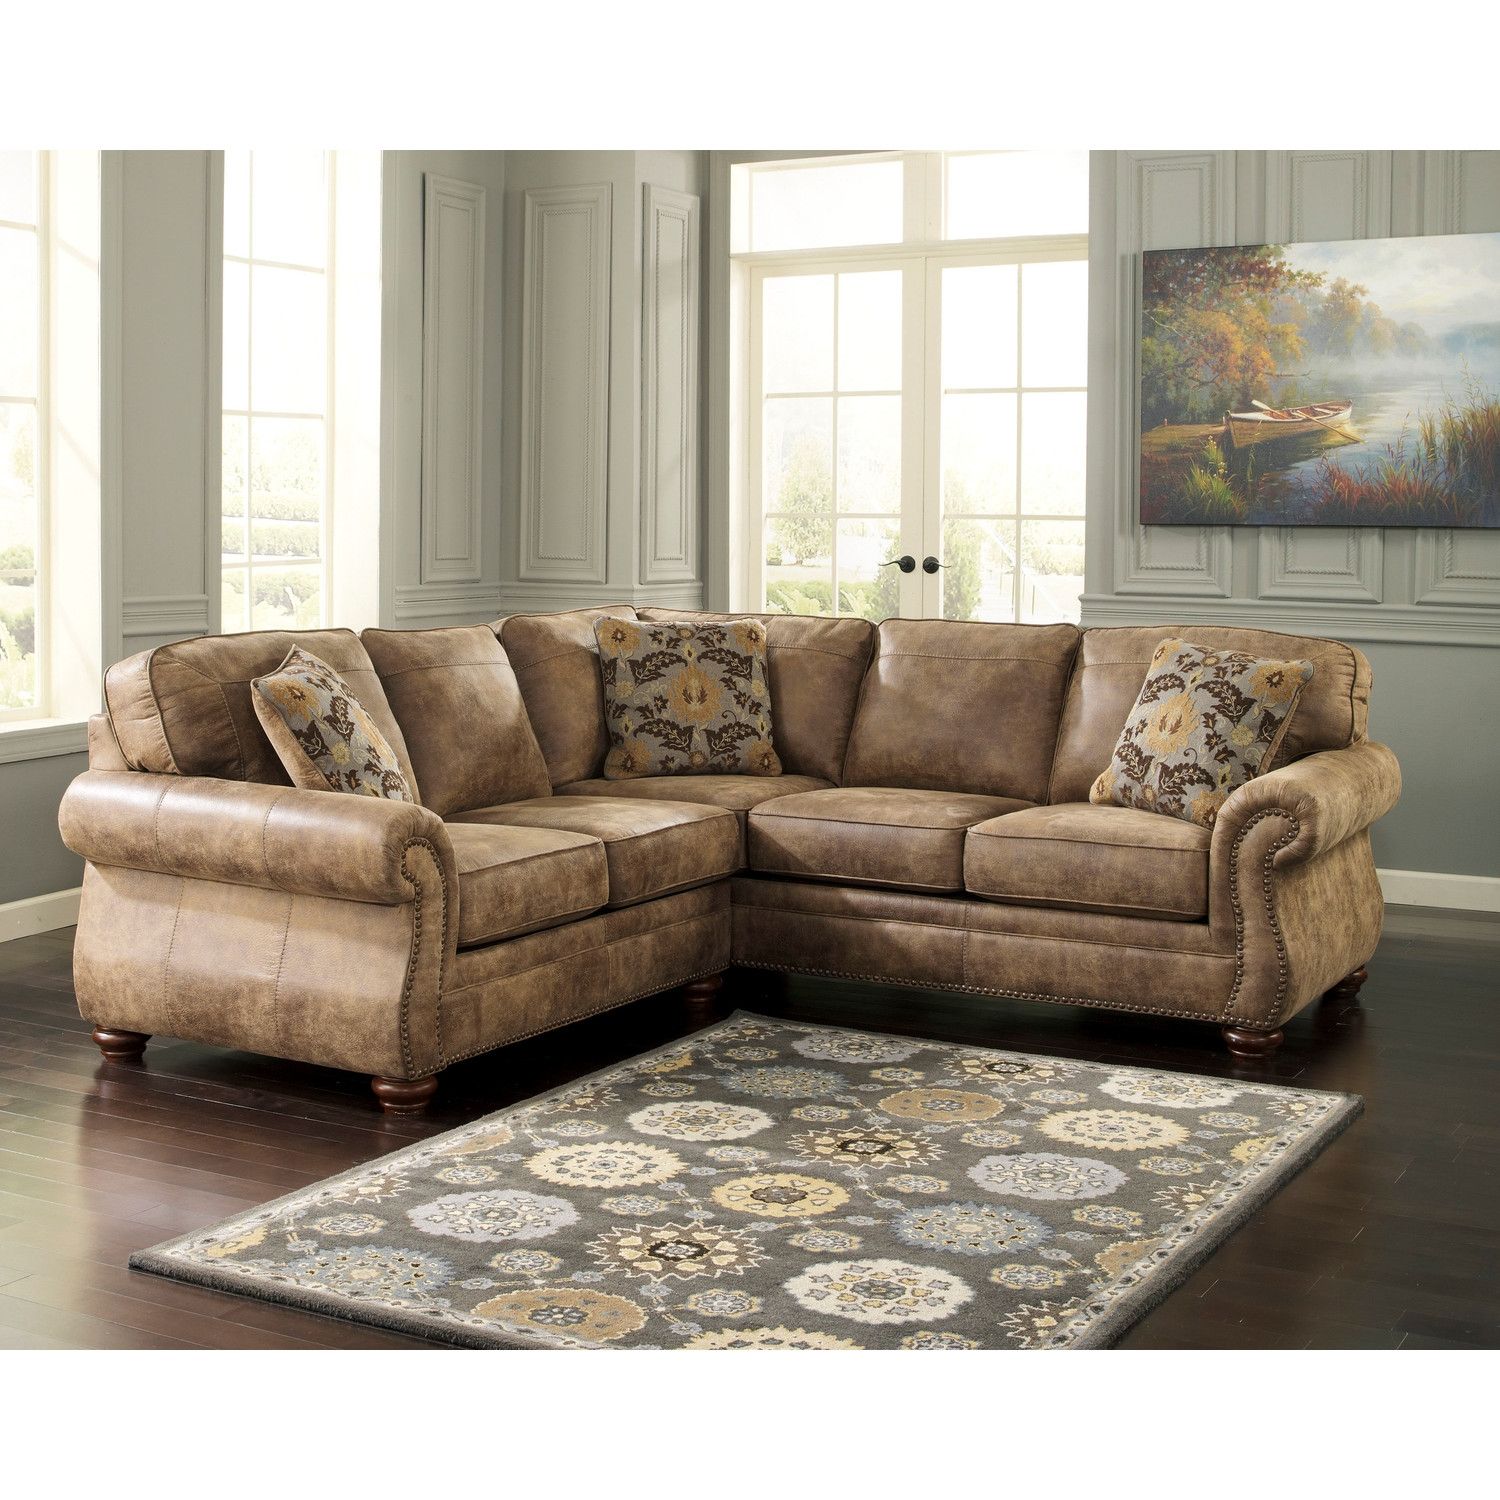 Small Sectional Sofa With Chaise Small Sectional Sofa With Chaise Pertaining To Small Sectional Sofa (View 4 of 12)